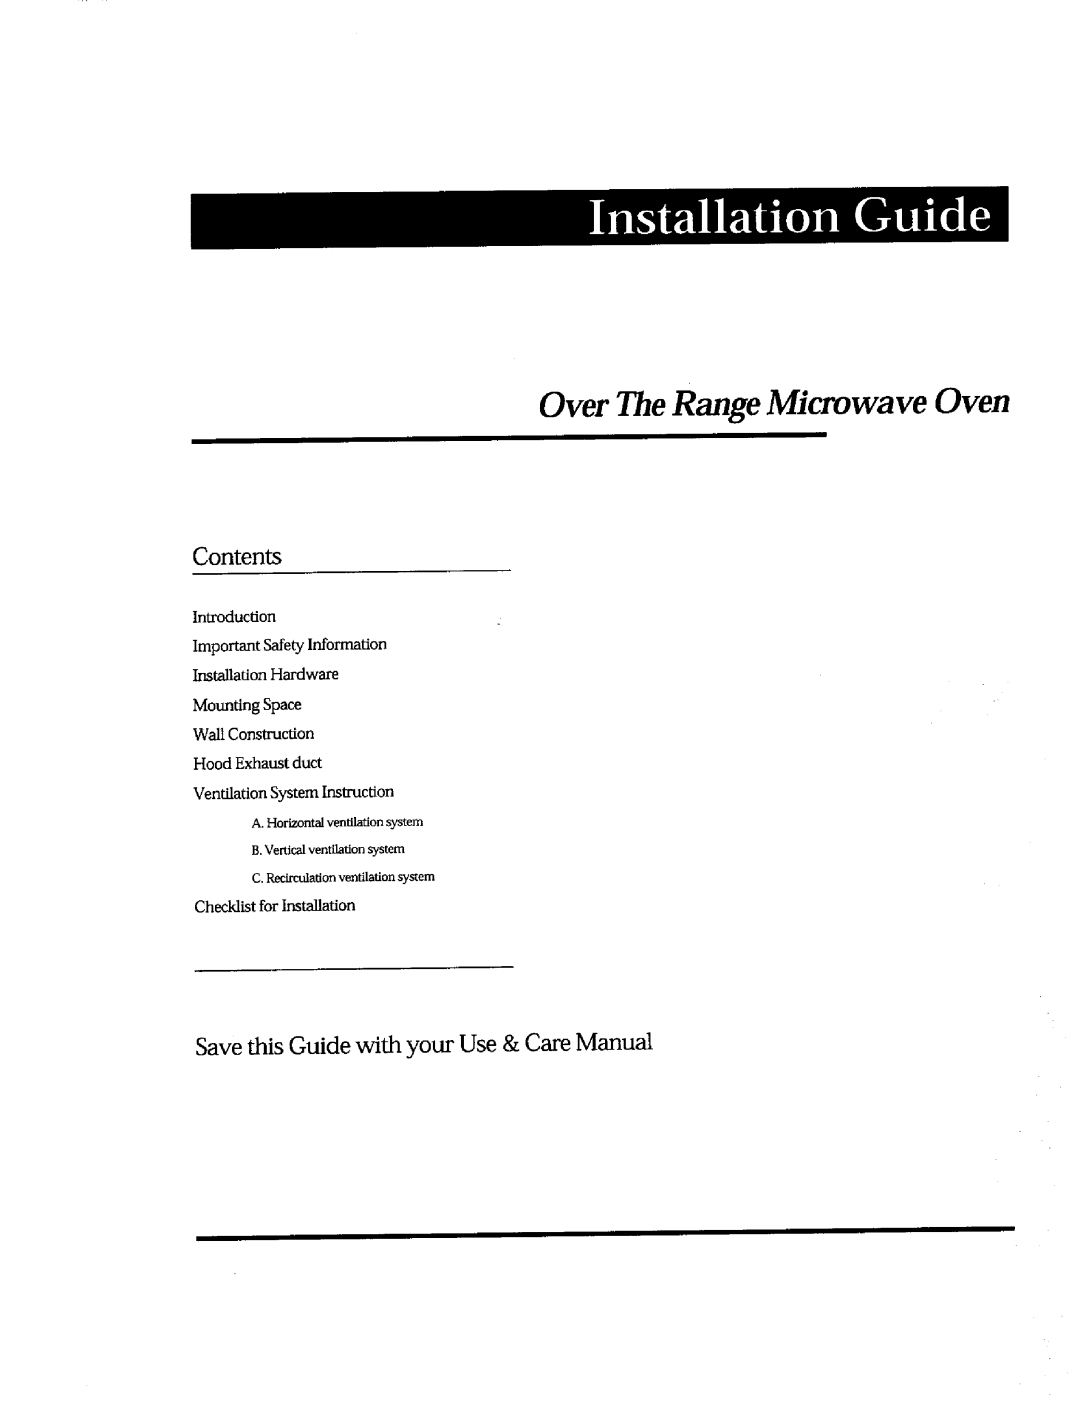 Whirlpool Ni-l30 manual Installatin Guide, Over The Range Microwave Oven, Contents, Installation Hardware Mounting Space 